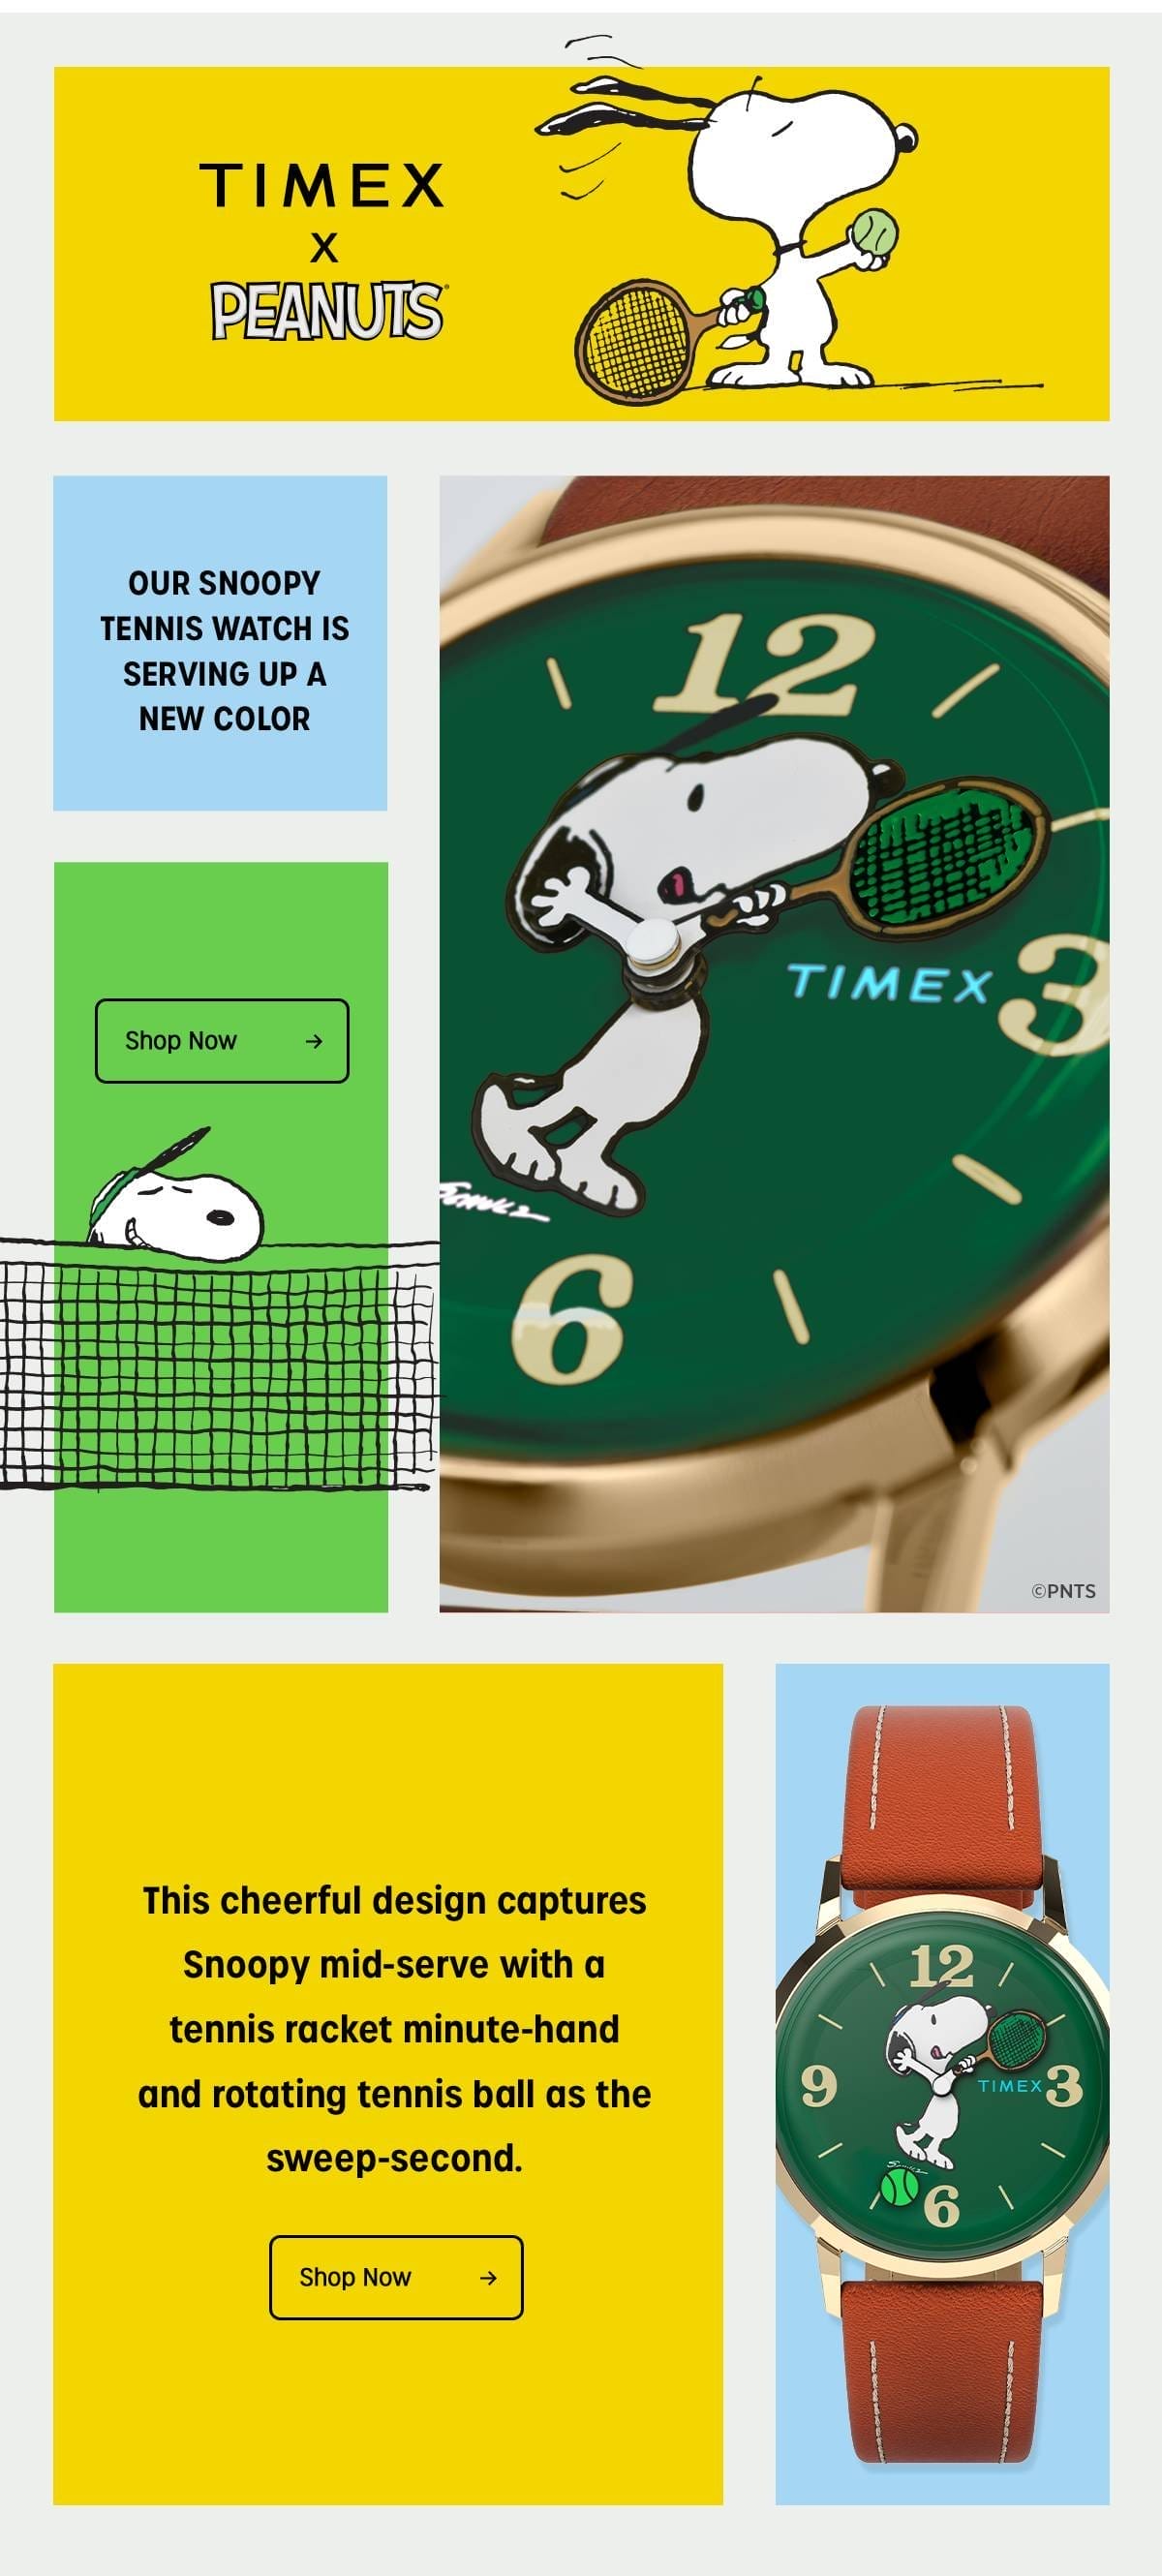 TIMEX X PEANUTS | OUR SNOOPY TENNIS WATCH IS SERVING UP A NEW COLOR | This cheerful design captures Snoopy mid-serve with a tennis racket minute-hand and rotating tennis ball as the sweep-second. | Shop Now